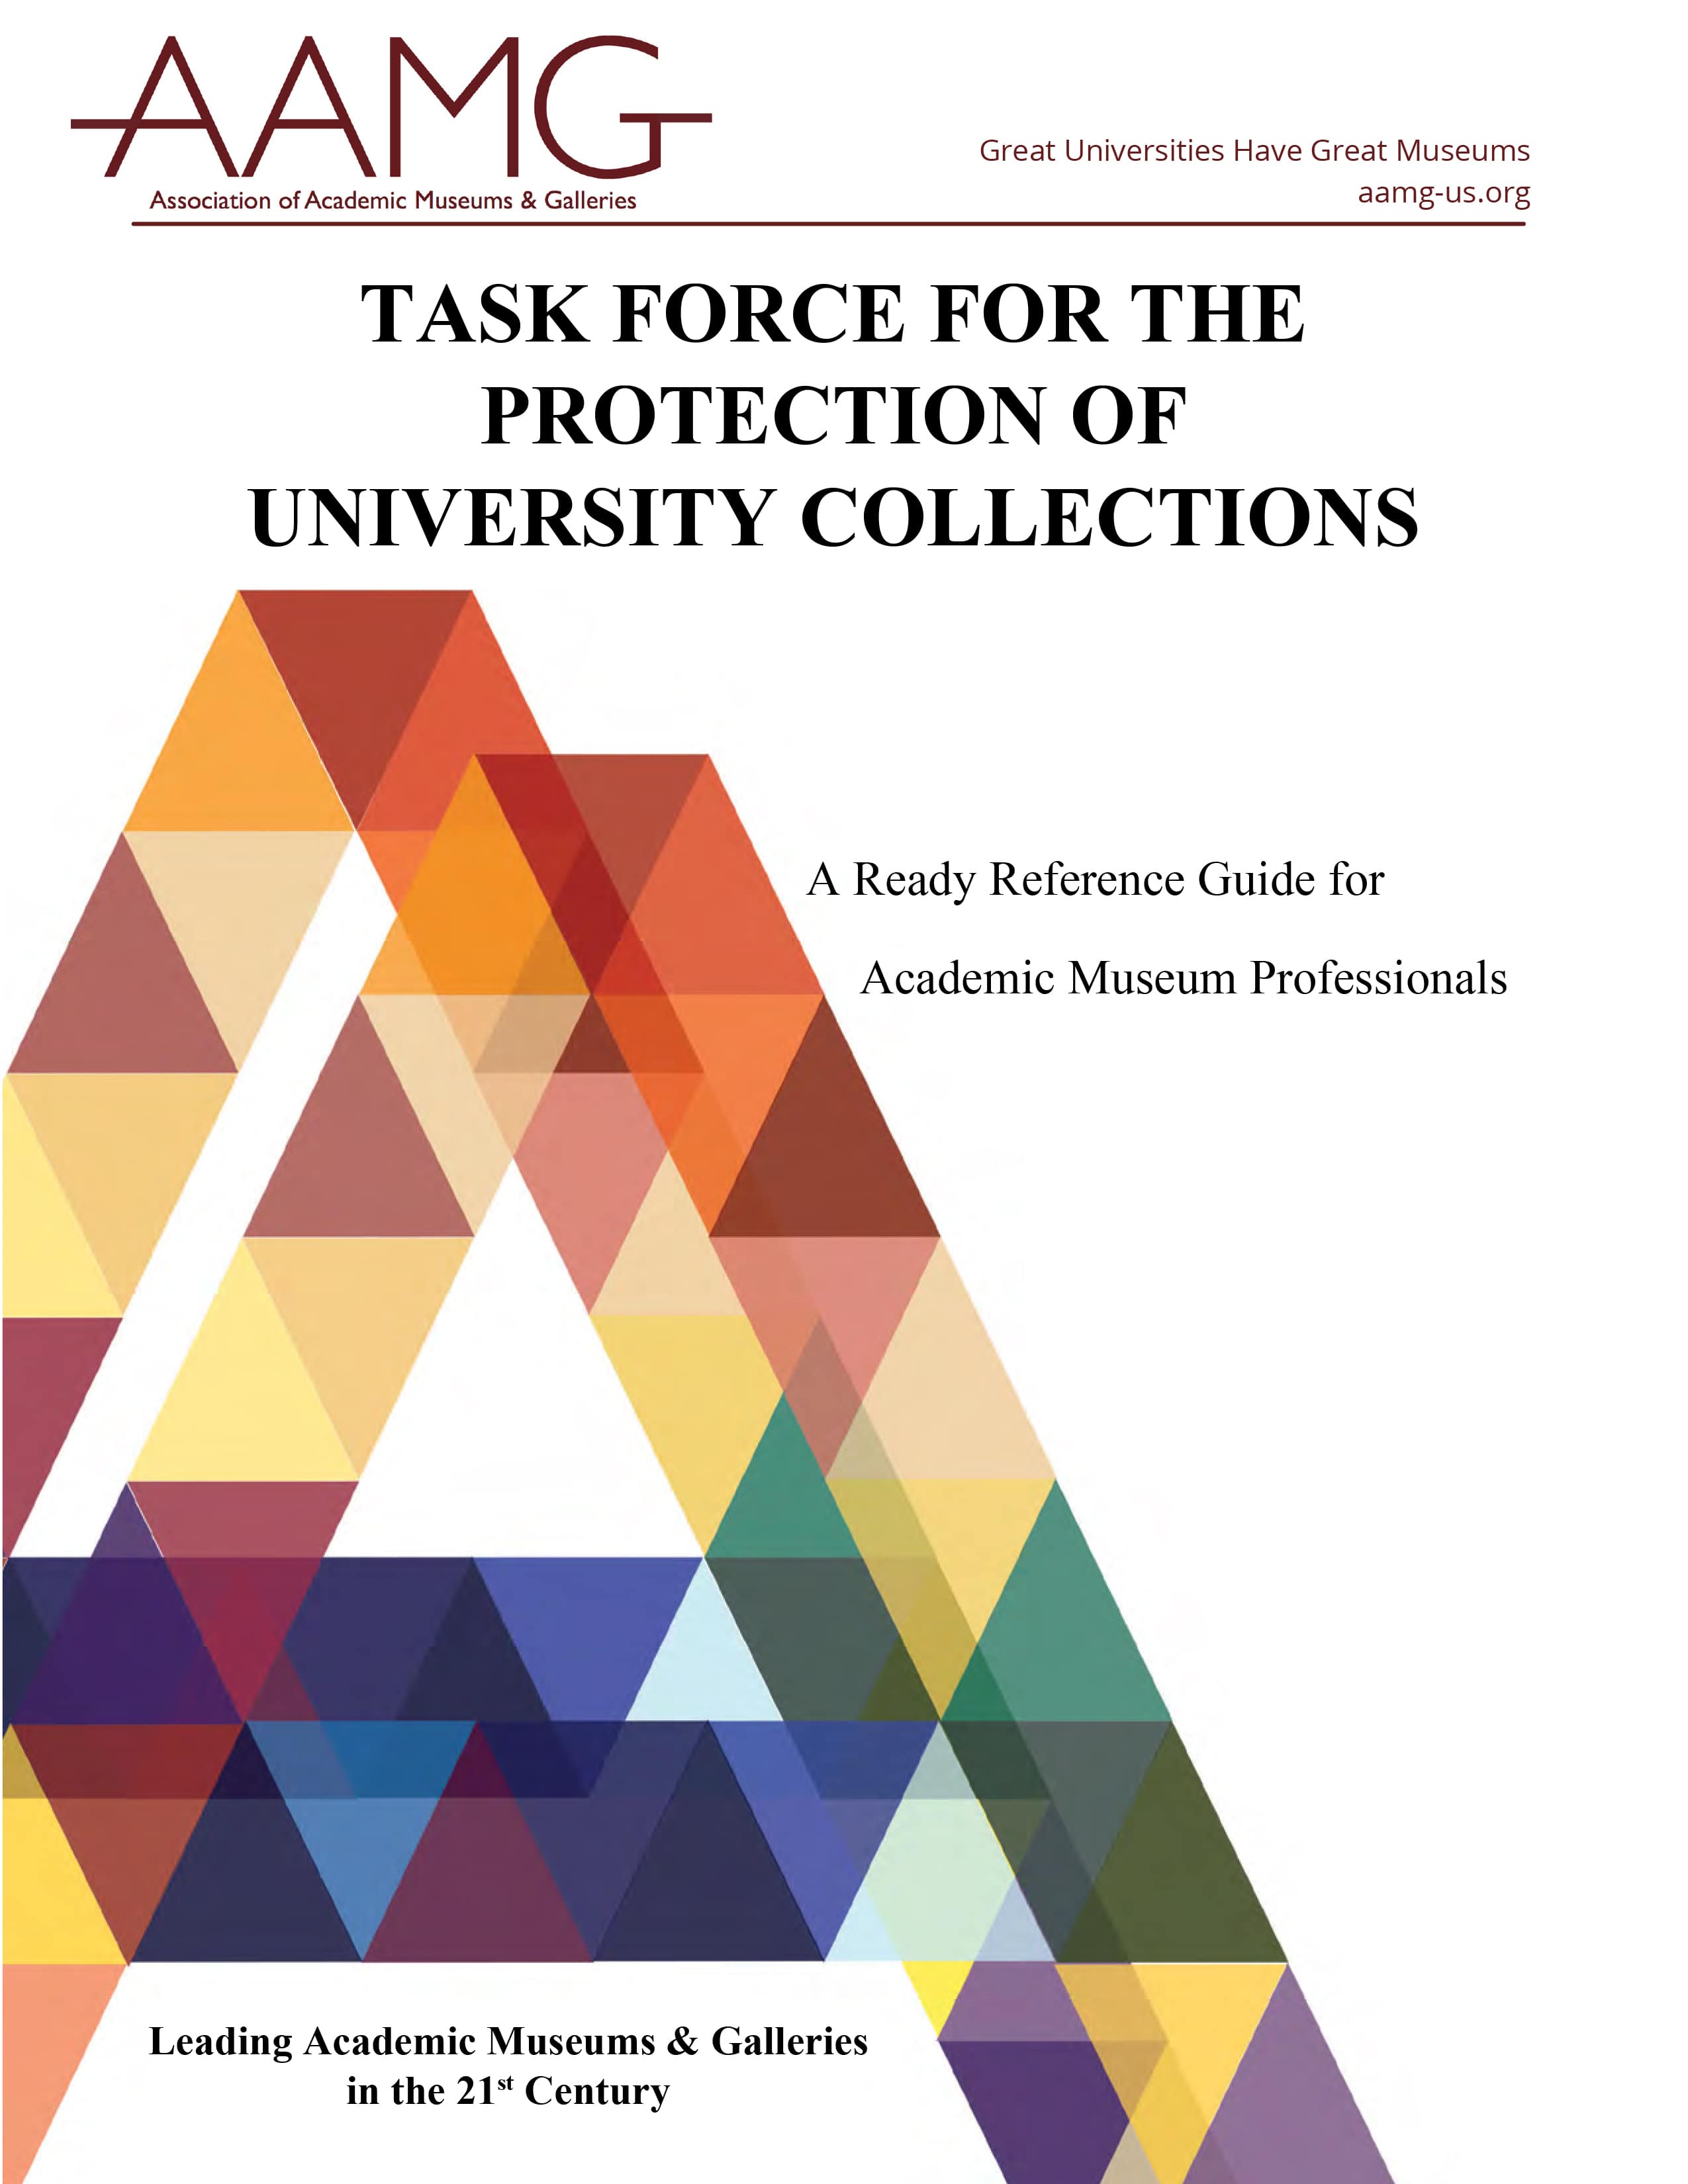 Cover of the Task Force for the Protection of University Collections: A Ready Reference Guide for Museum Professionals publication